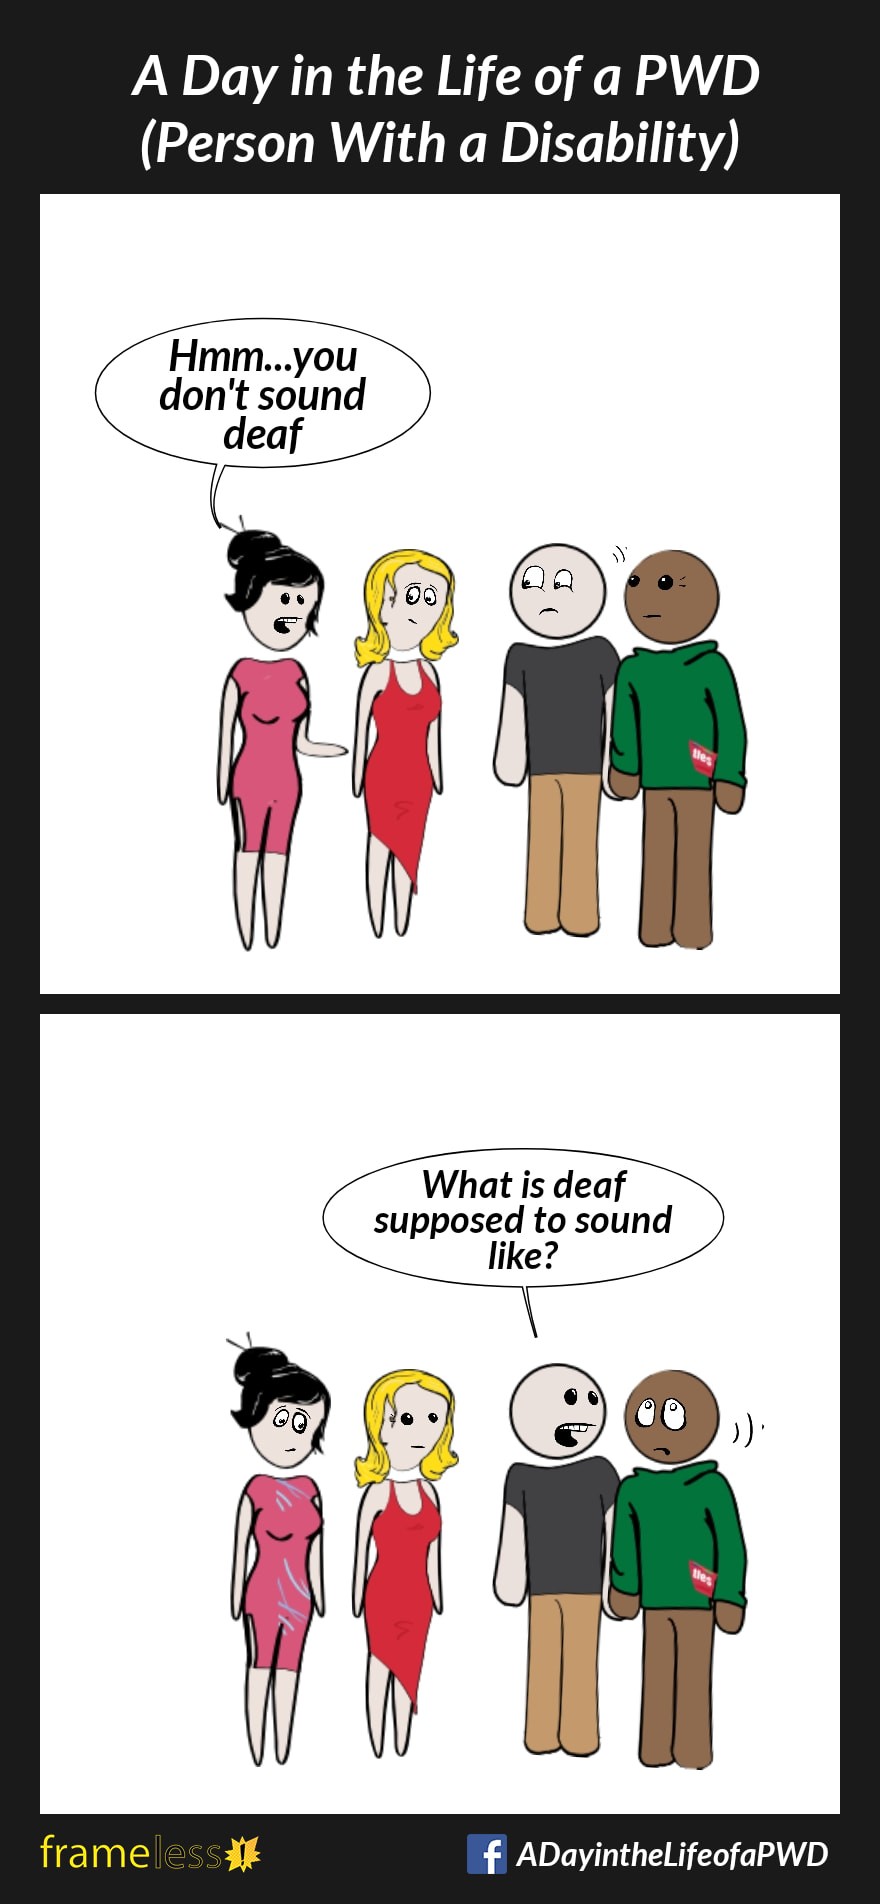 COMIC STRIP 
A Day in the Life of a PWD (Person With a Disability) 

Frame 1:
A Deaf man and his partner are talking to a woman and her friend.
WOMAN (to man): Hmm...you don't sound deaf

Frame 2:
MAN (turning to his partner): What is deaf supposed to sound like?
Partner rolls his eyes.